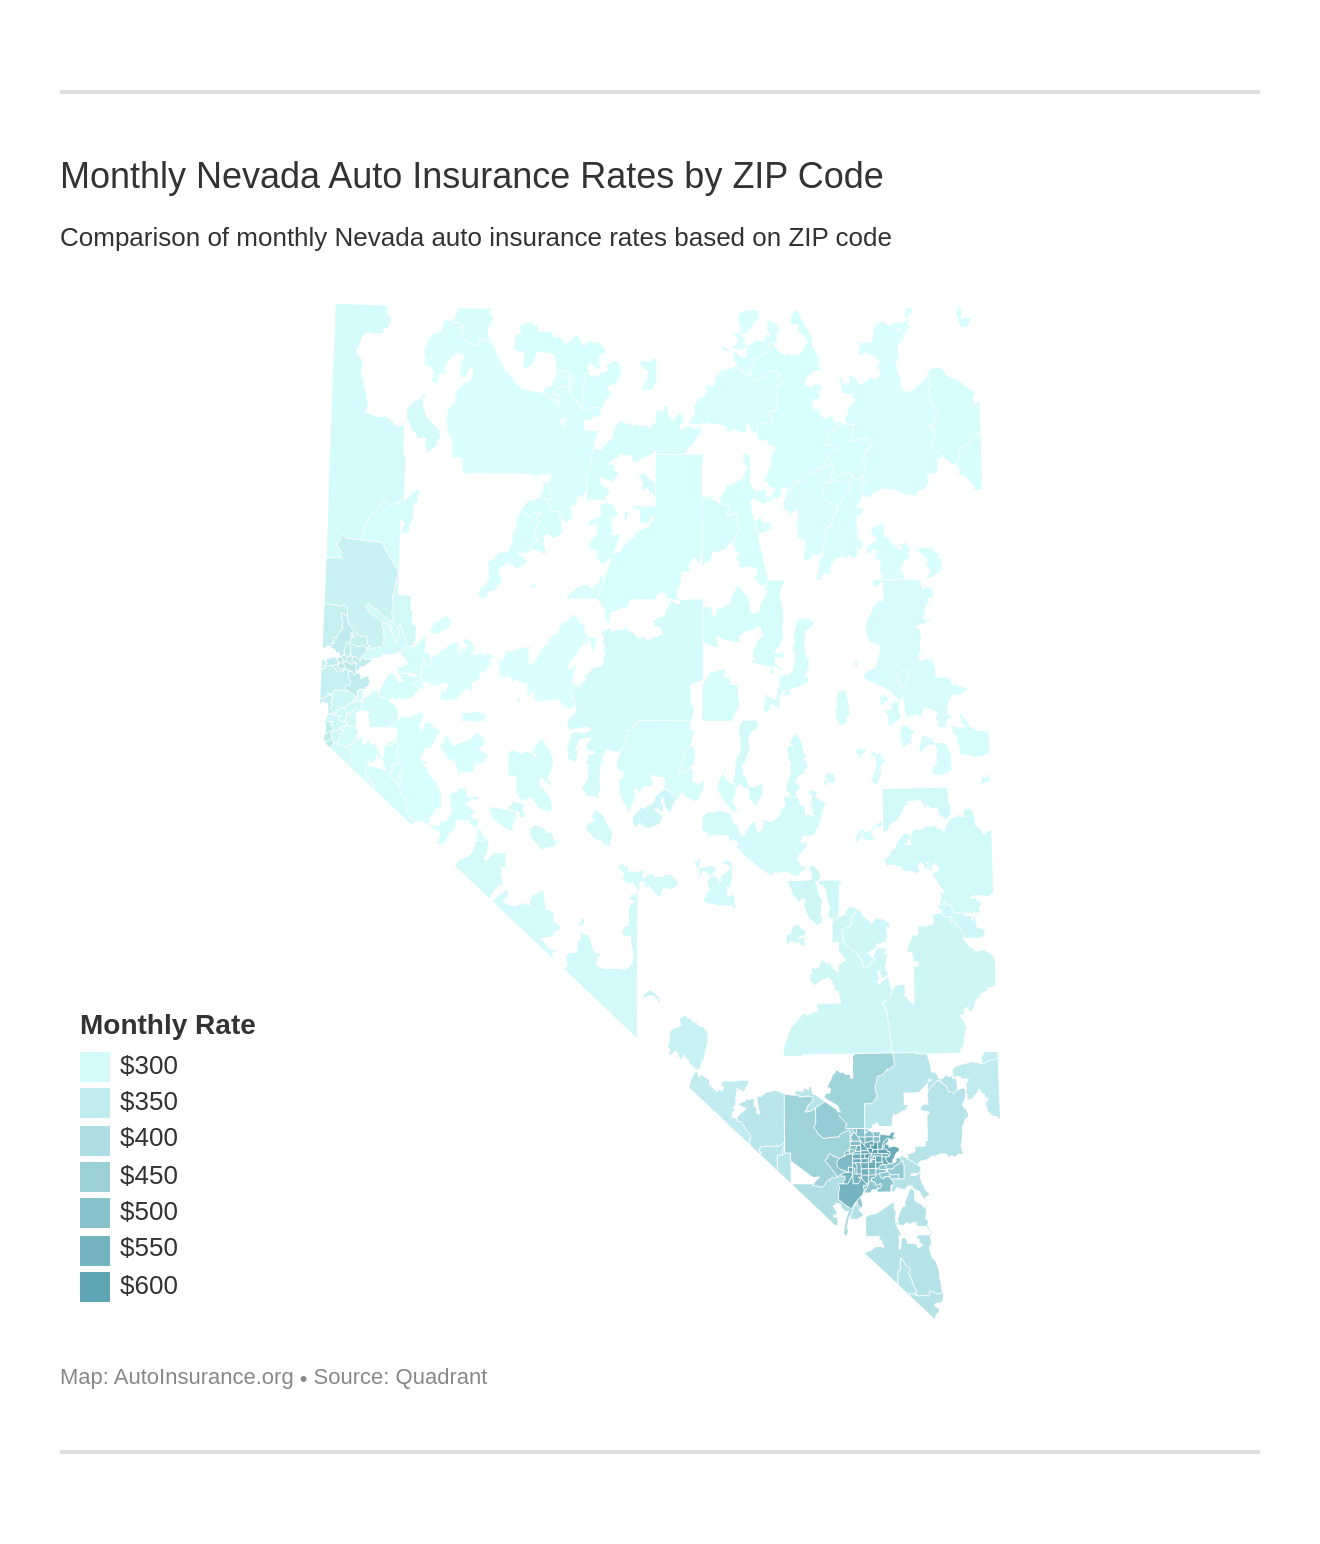 Monthly Nevada Auto Insurance Rates by ZIP Code